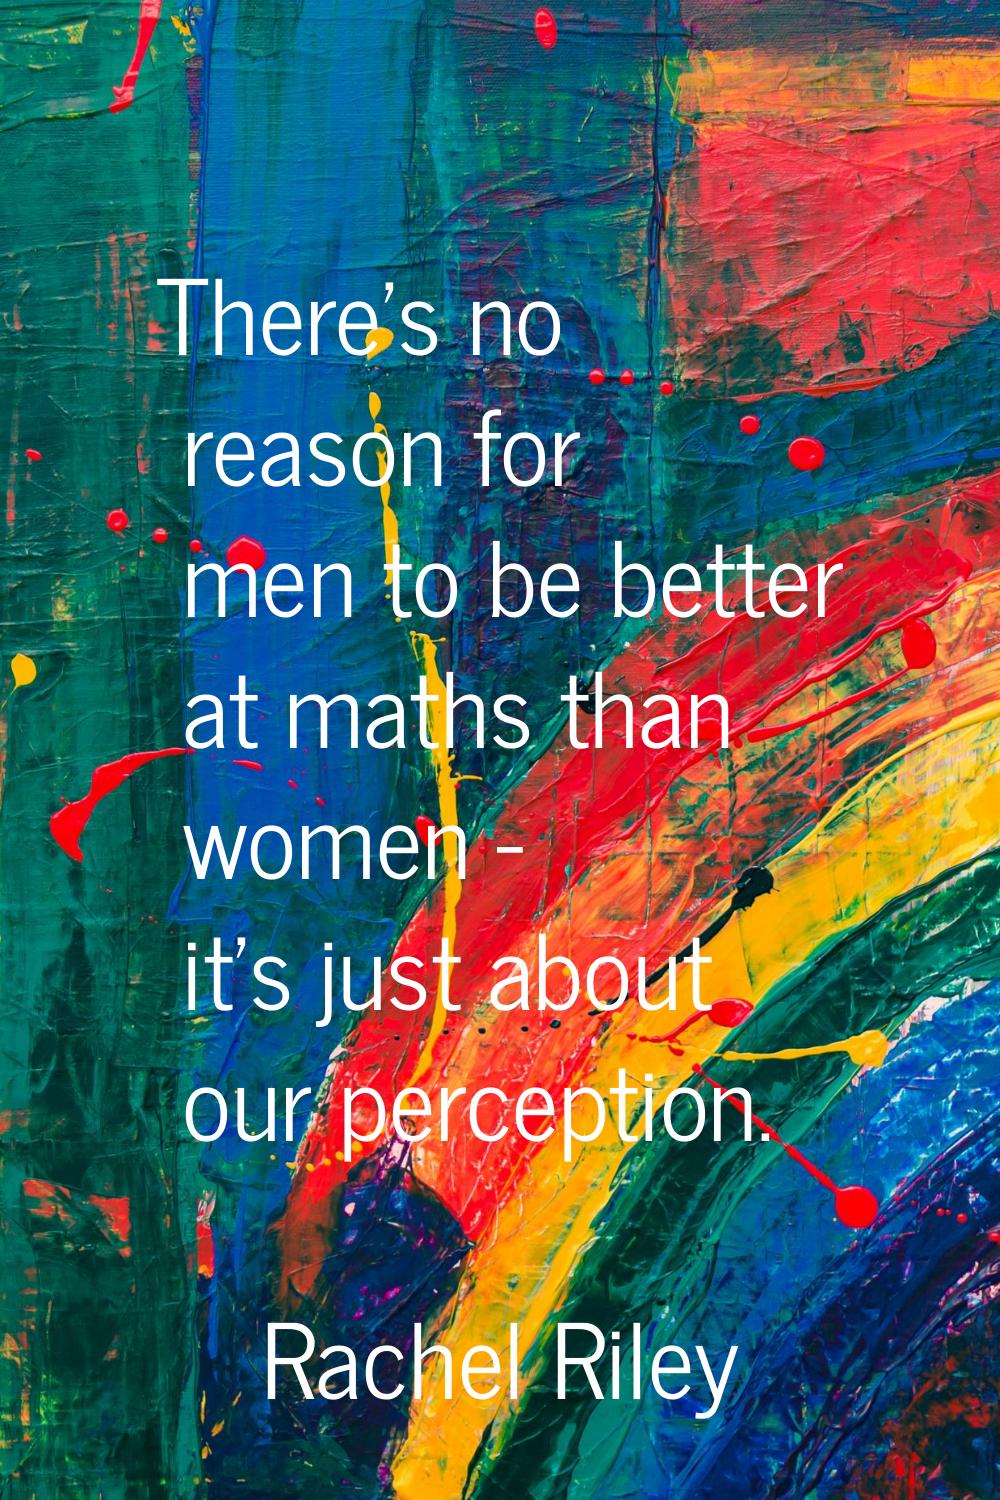 There's no reason for men to be better at maths than women - it's just about our perception.